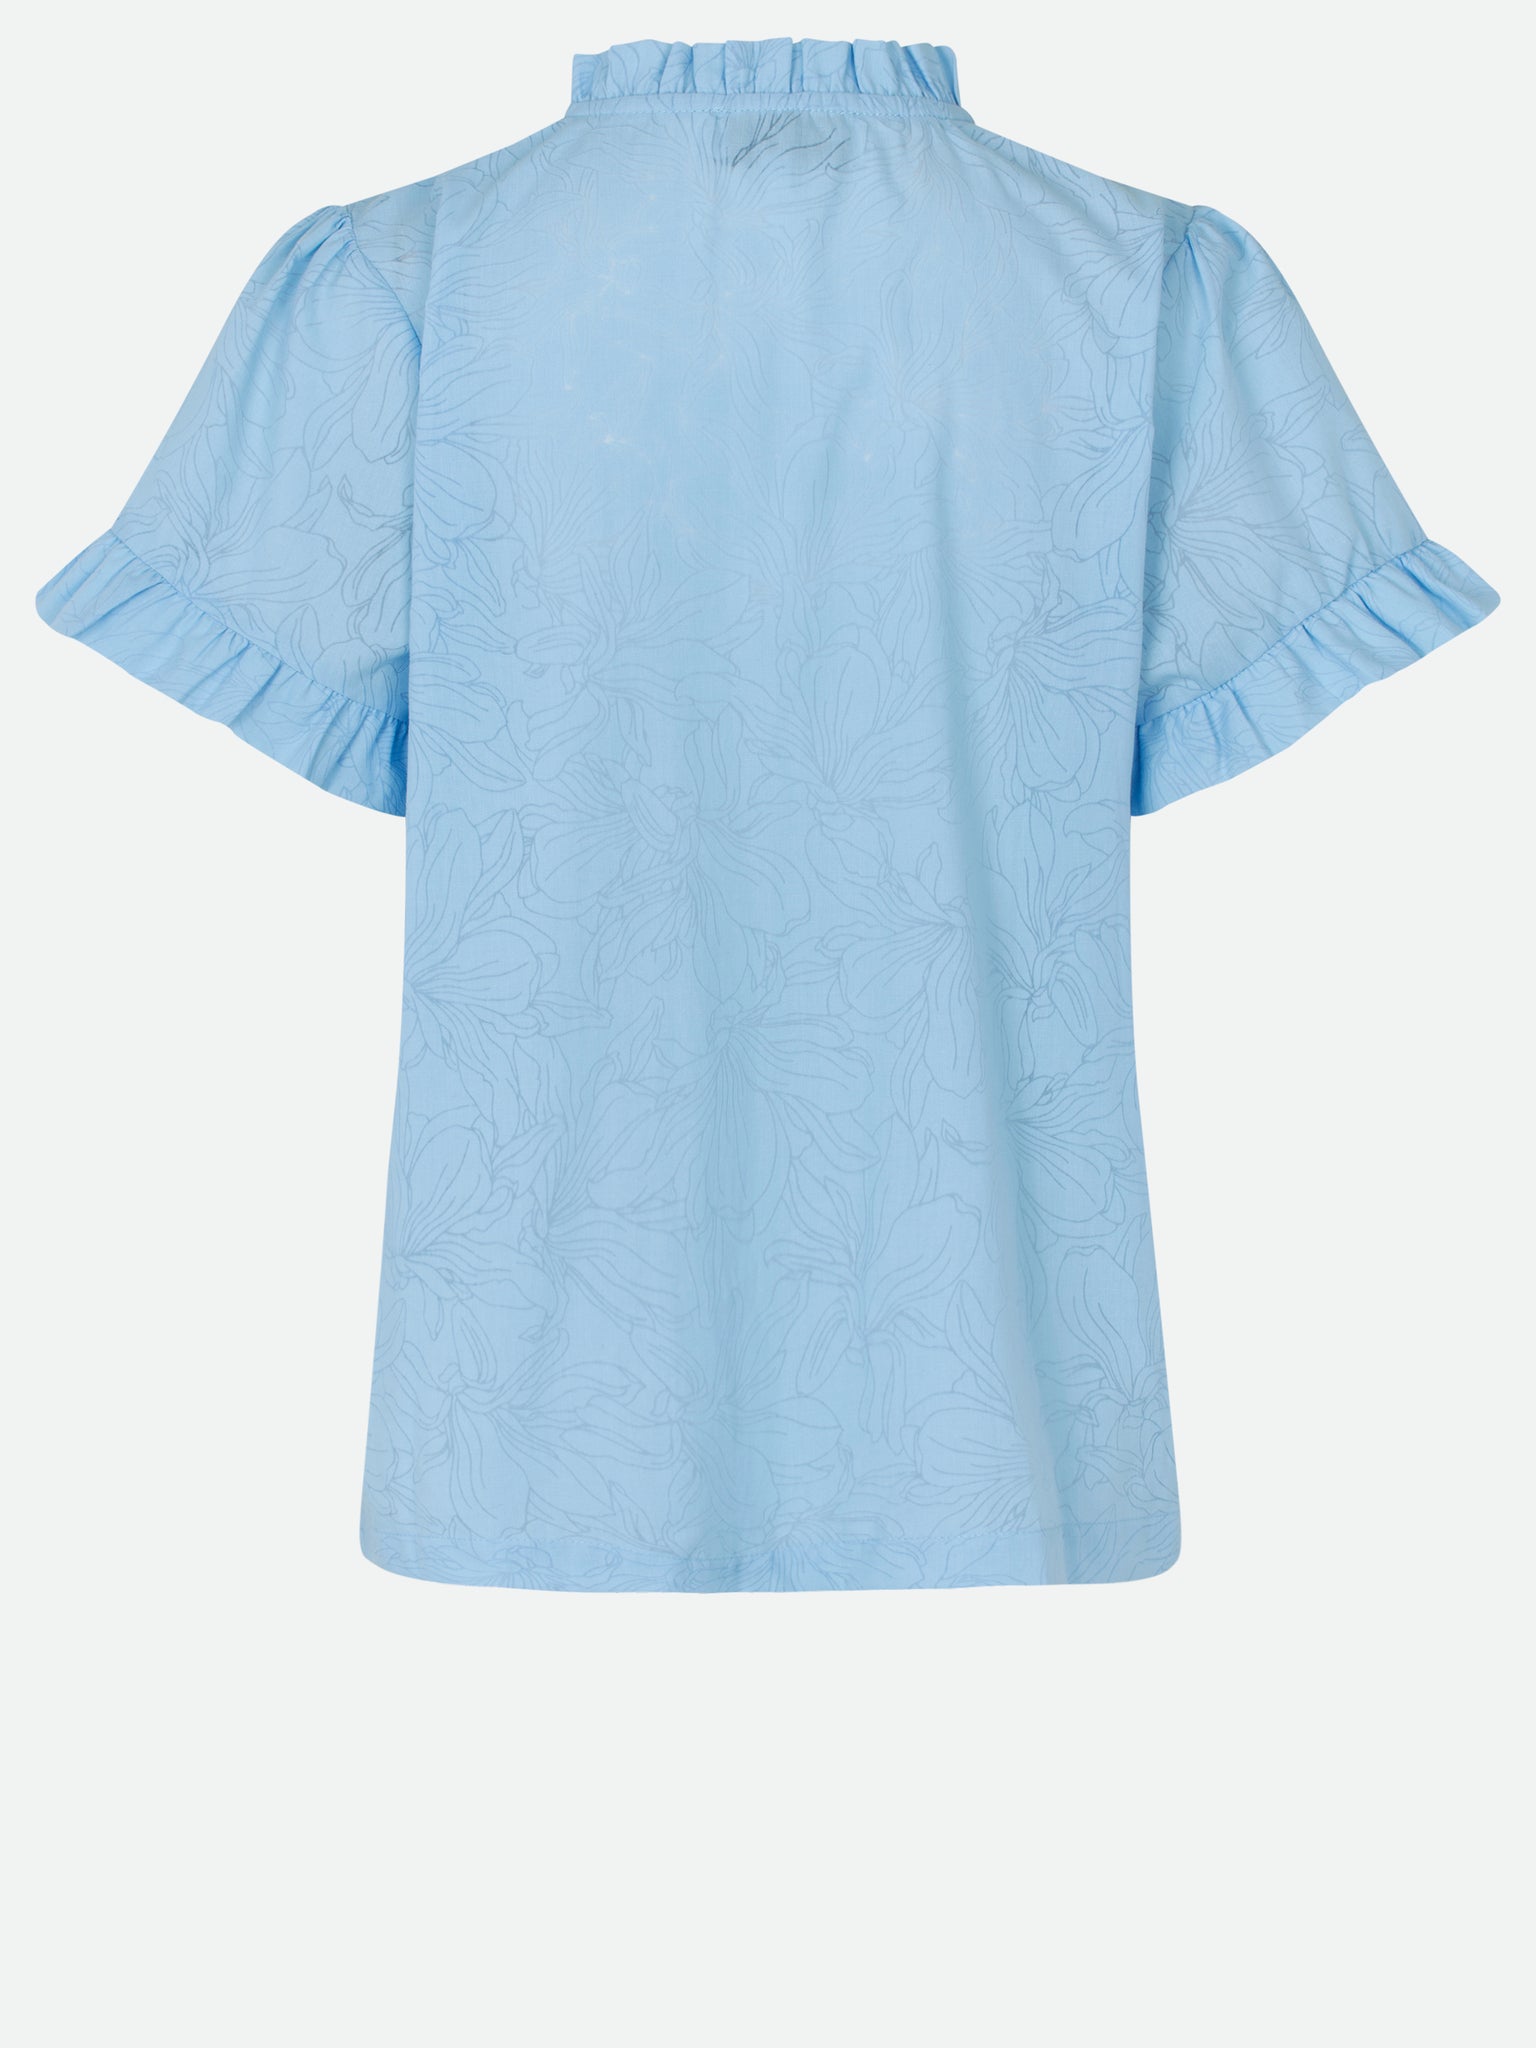 Voile blouse with ruffles